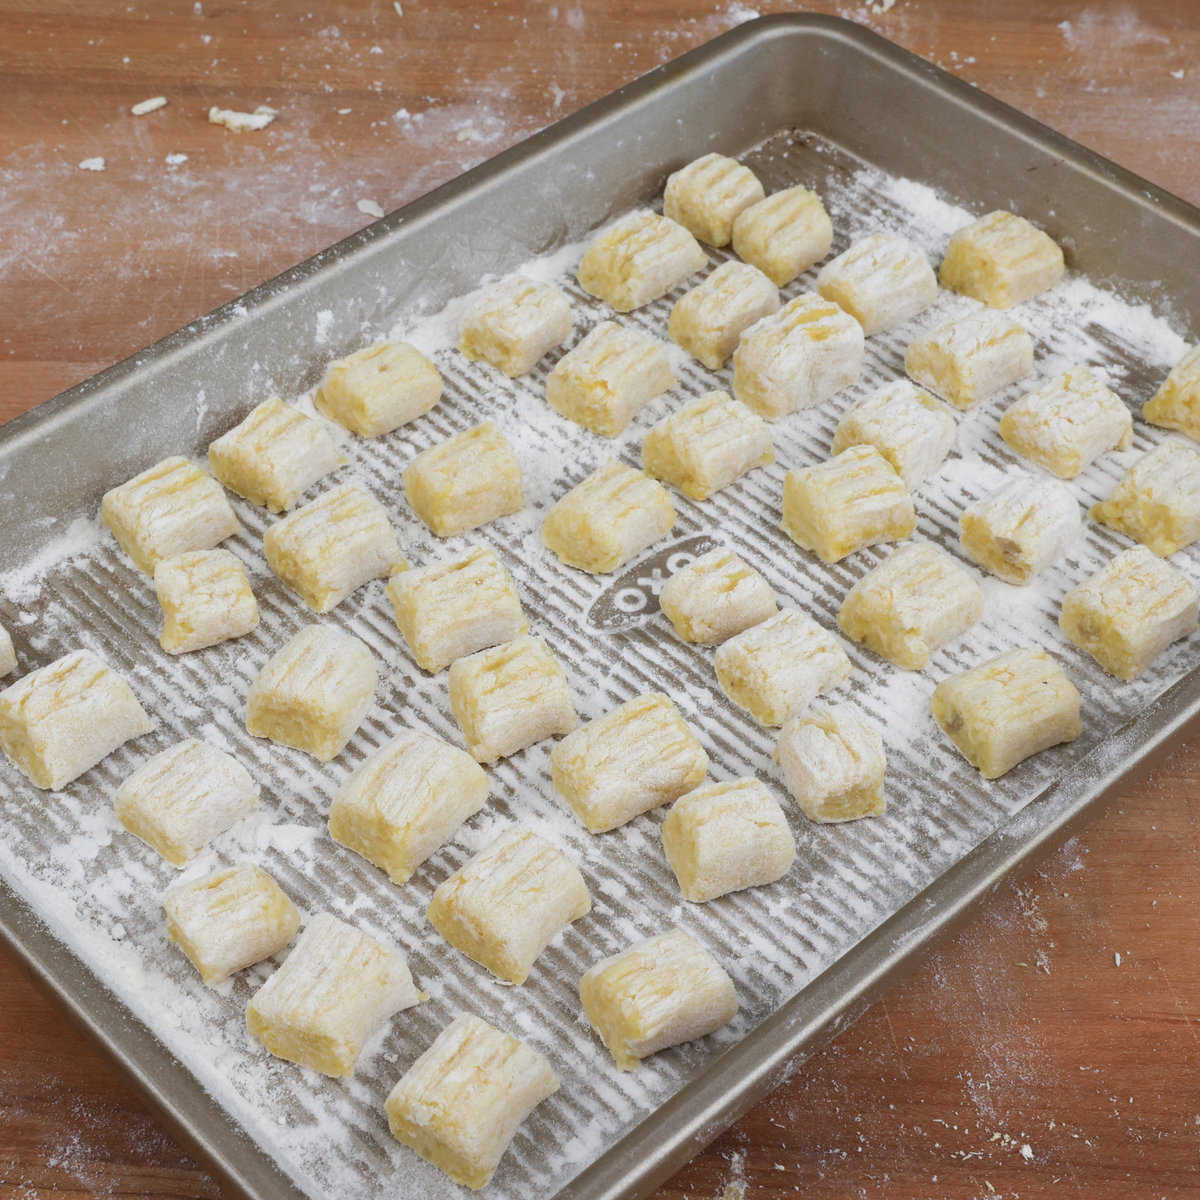 a rimmed baking sheet filled with uncooked potato gnocchi lightly dusted with flour